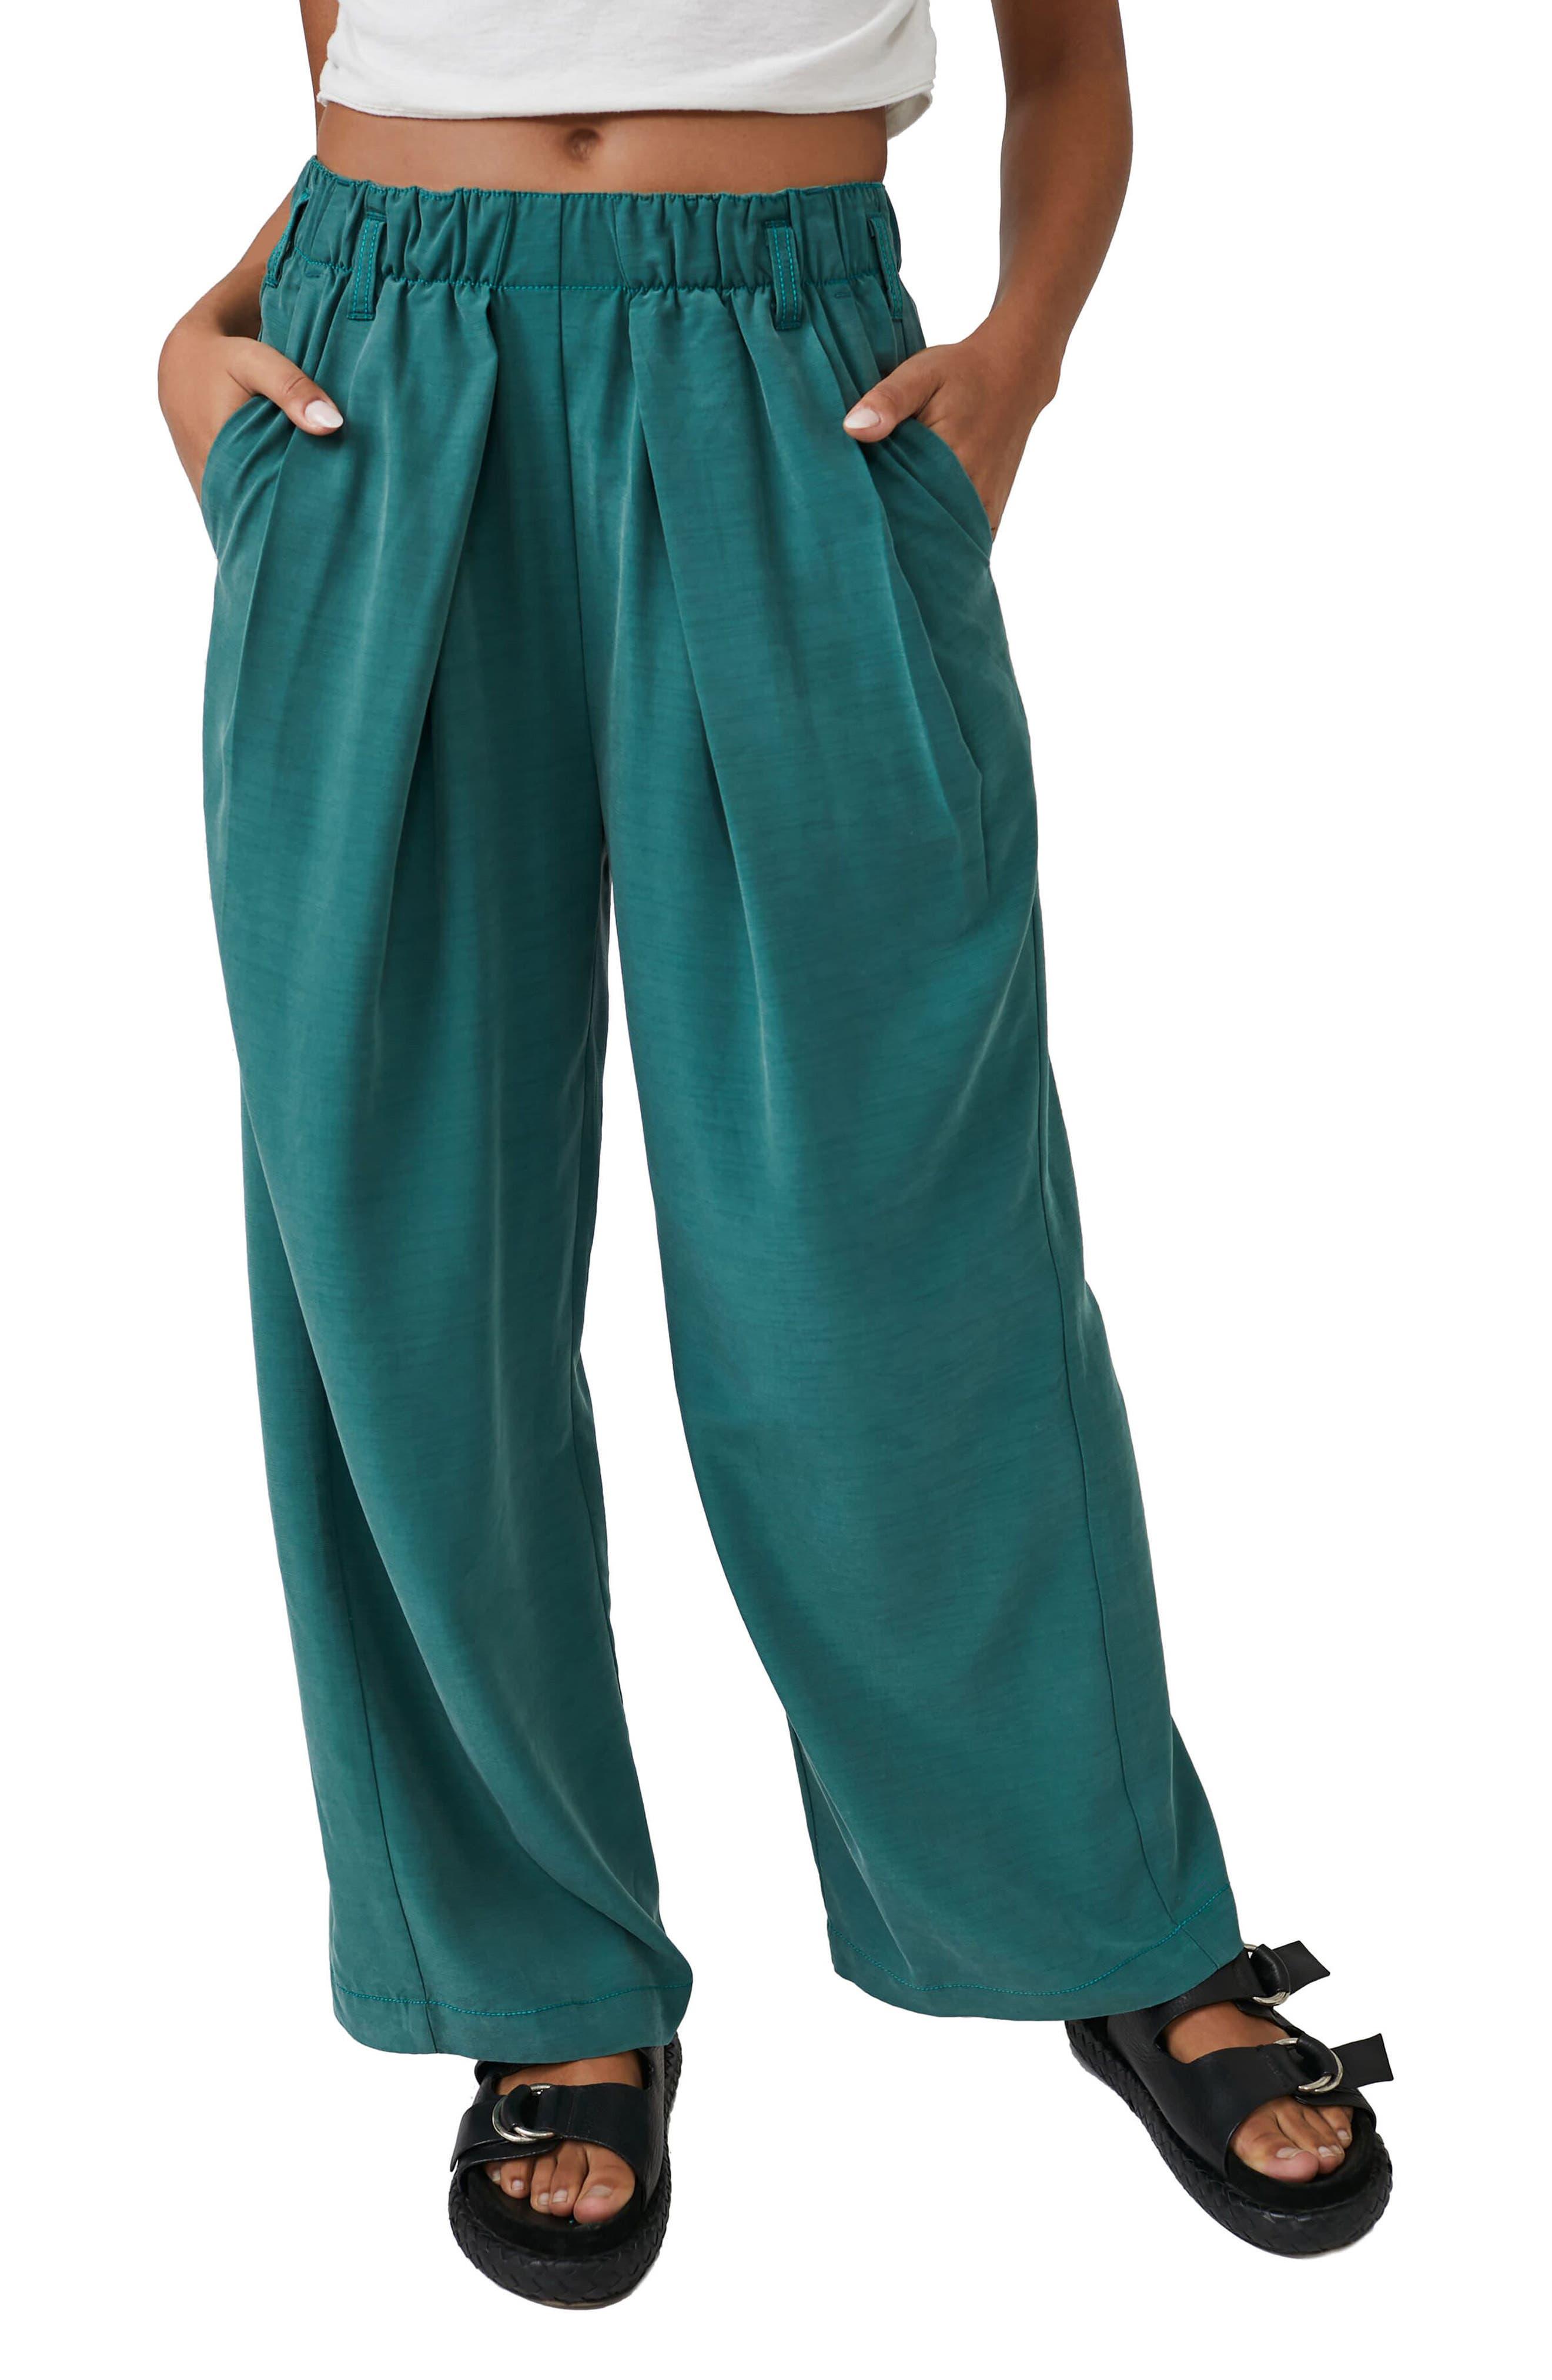 Free People Nothin' To Say Elastic Waist Pants in Green